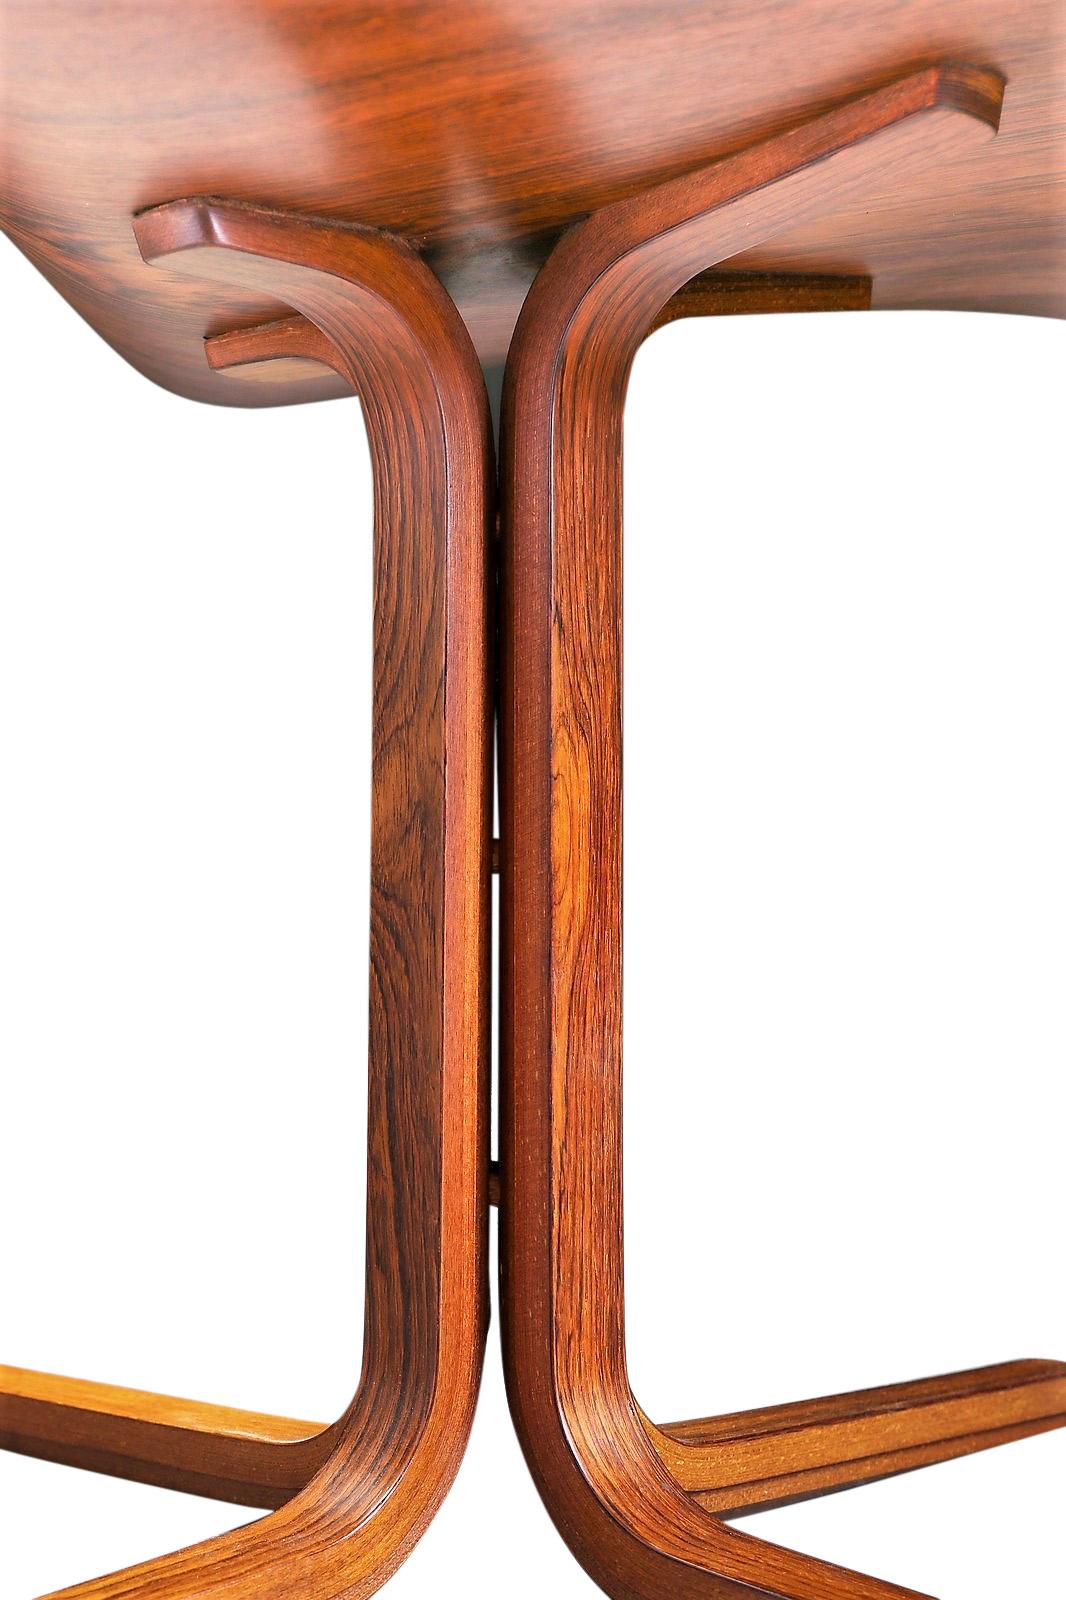 Danish Arne Jacobsen High-Backed ‘Oxford’ Chair in Rosewood, 1965